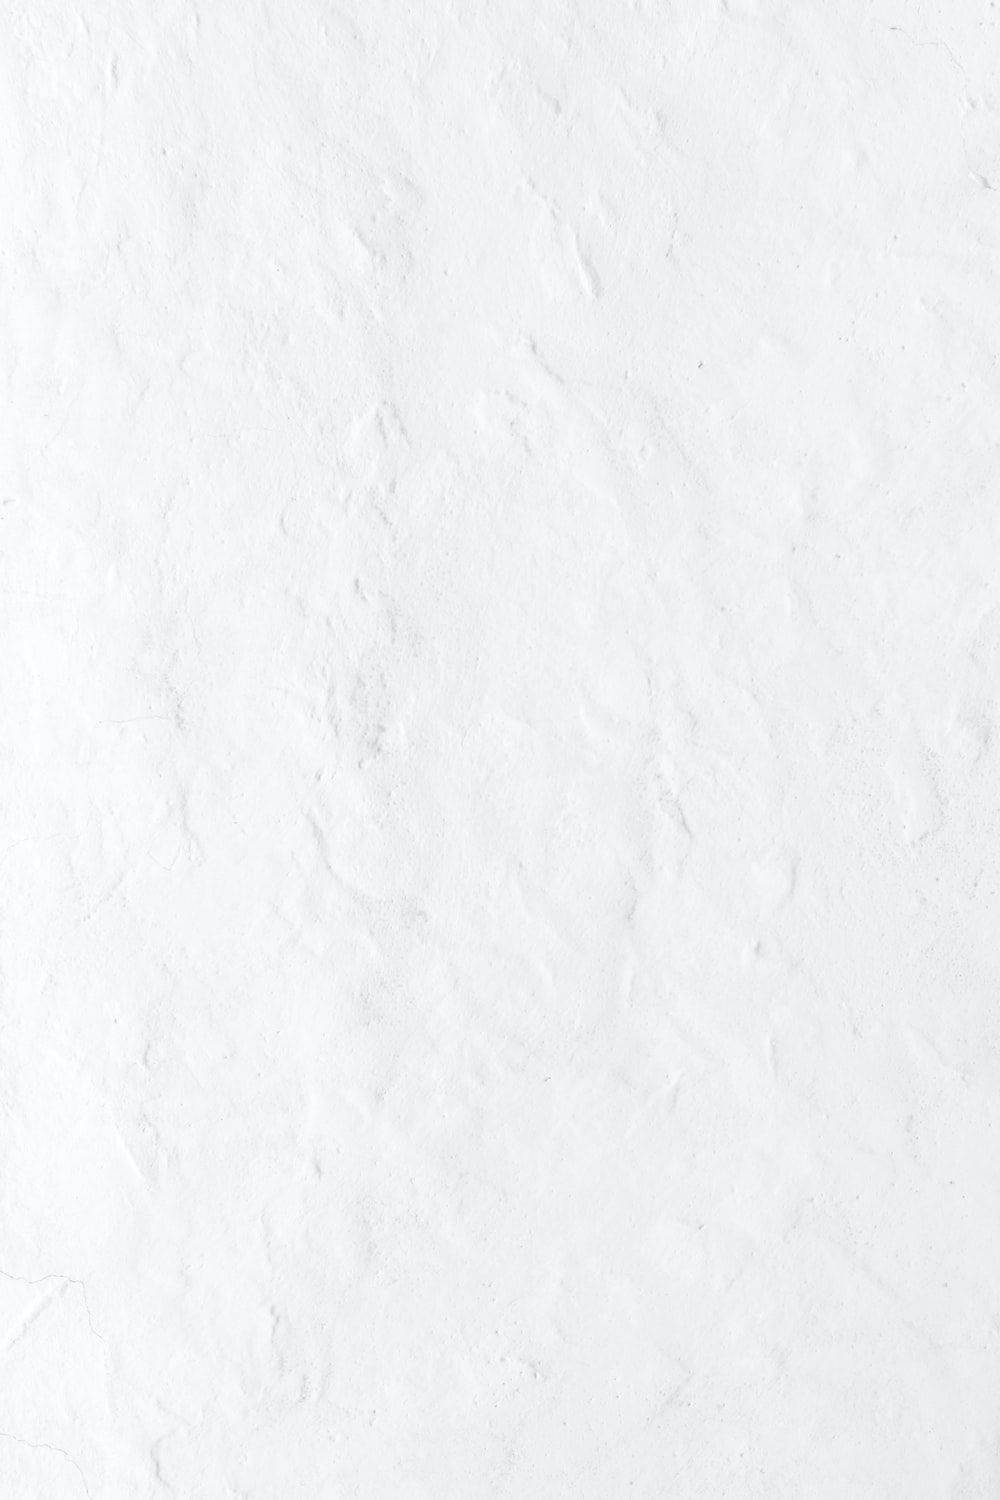 Blank White Cracked Paint Texture